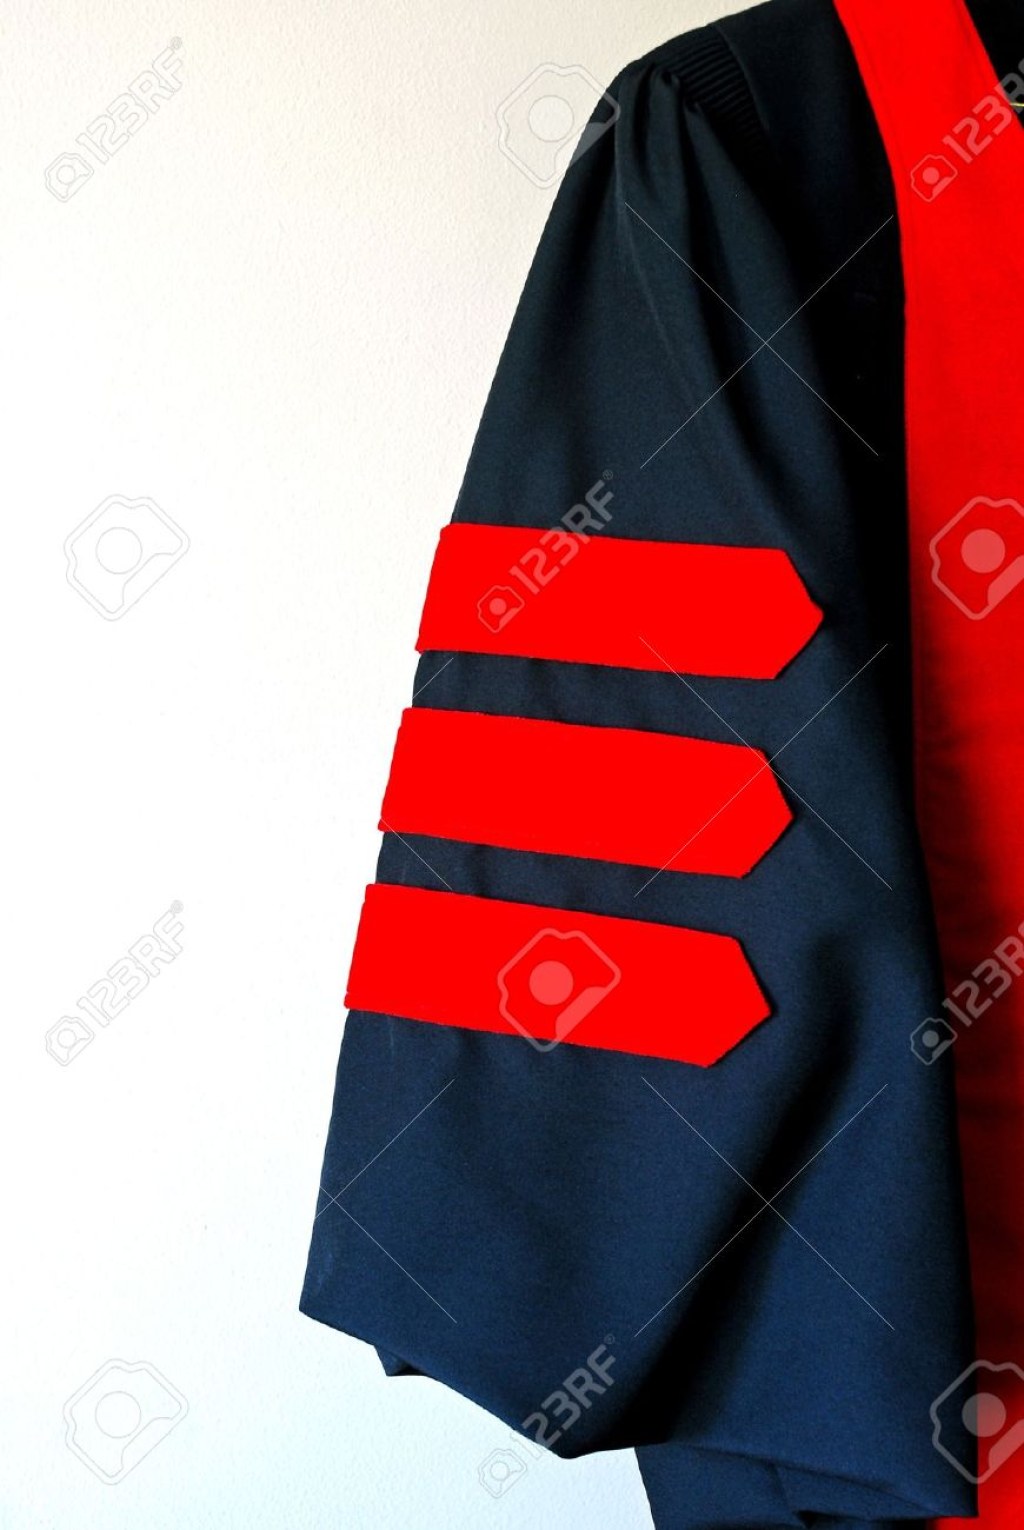 Picture of: Sleeve Of Black Graduation Robe With Three Red Doctoral Stripes